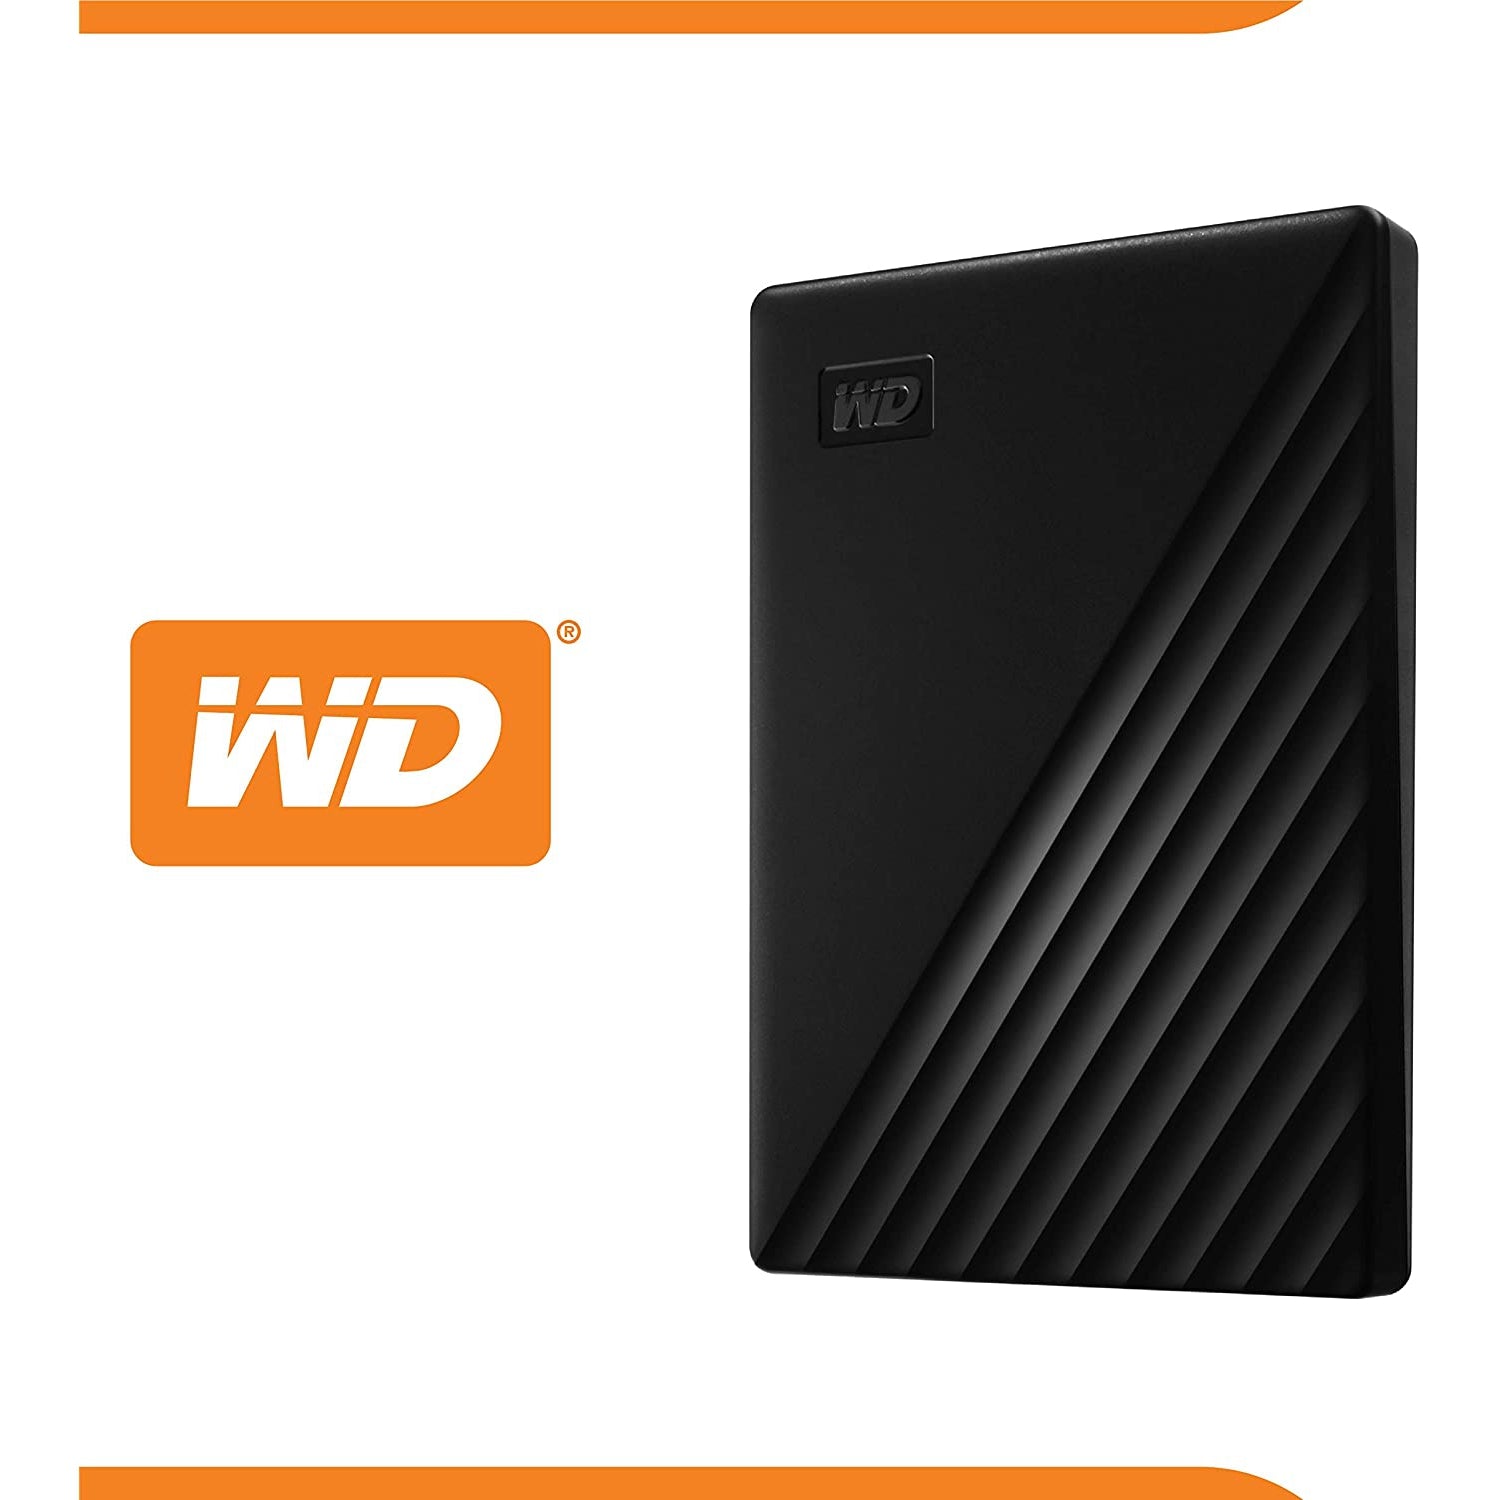 Western Digital 1TB My Passport Portable Hard Drive with Password Protection